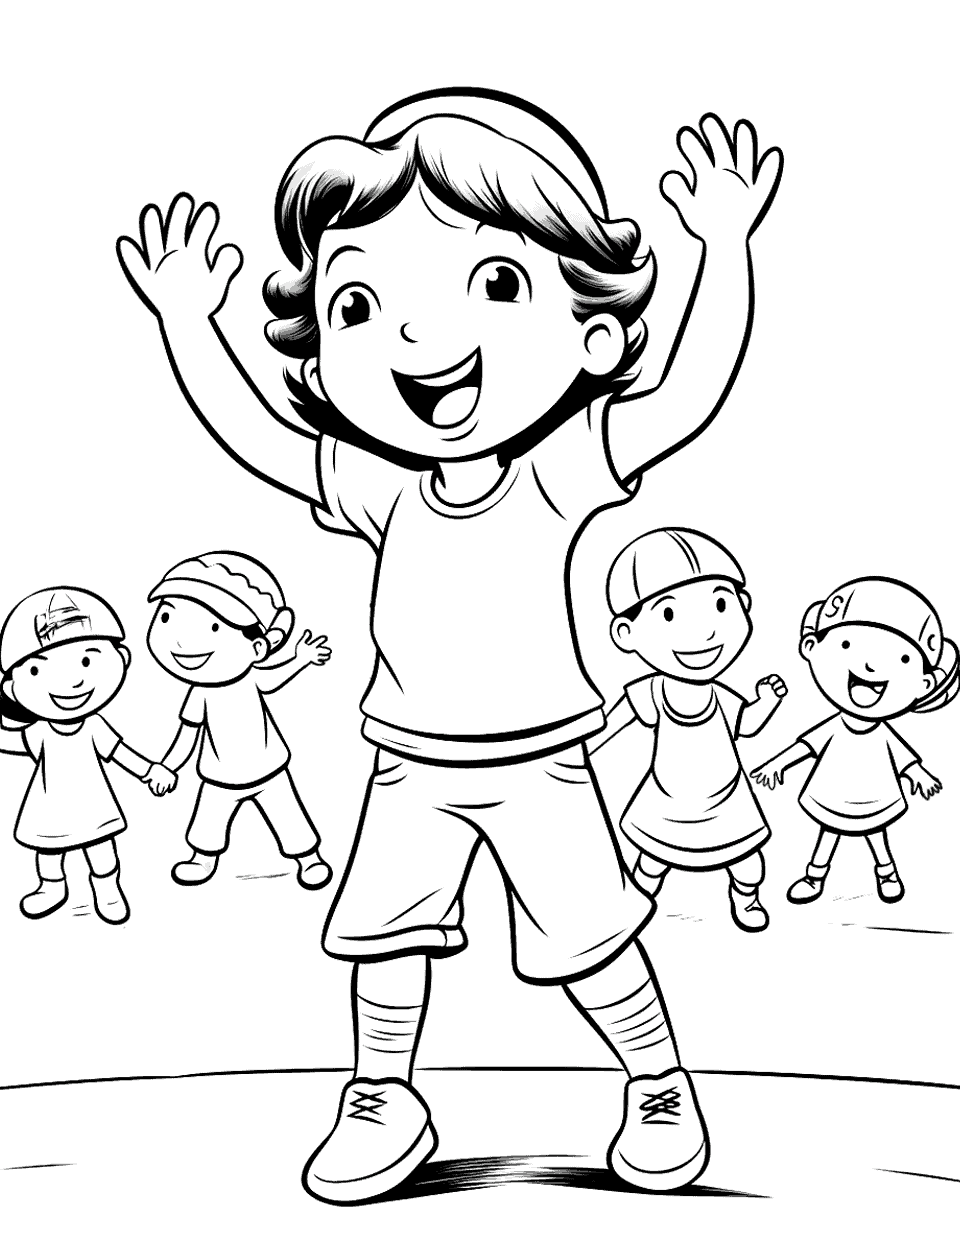 Team Mascot Dance Baseball Coloring Page - The team mascot dancing and entertaining the crowd during a game intermission.